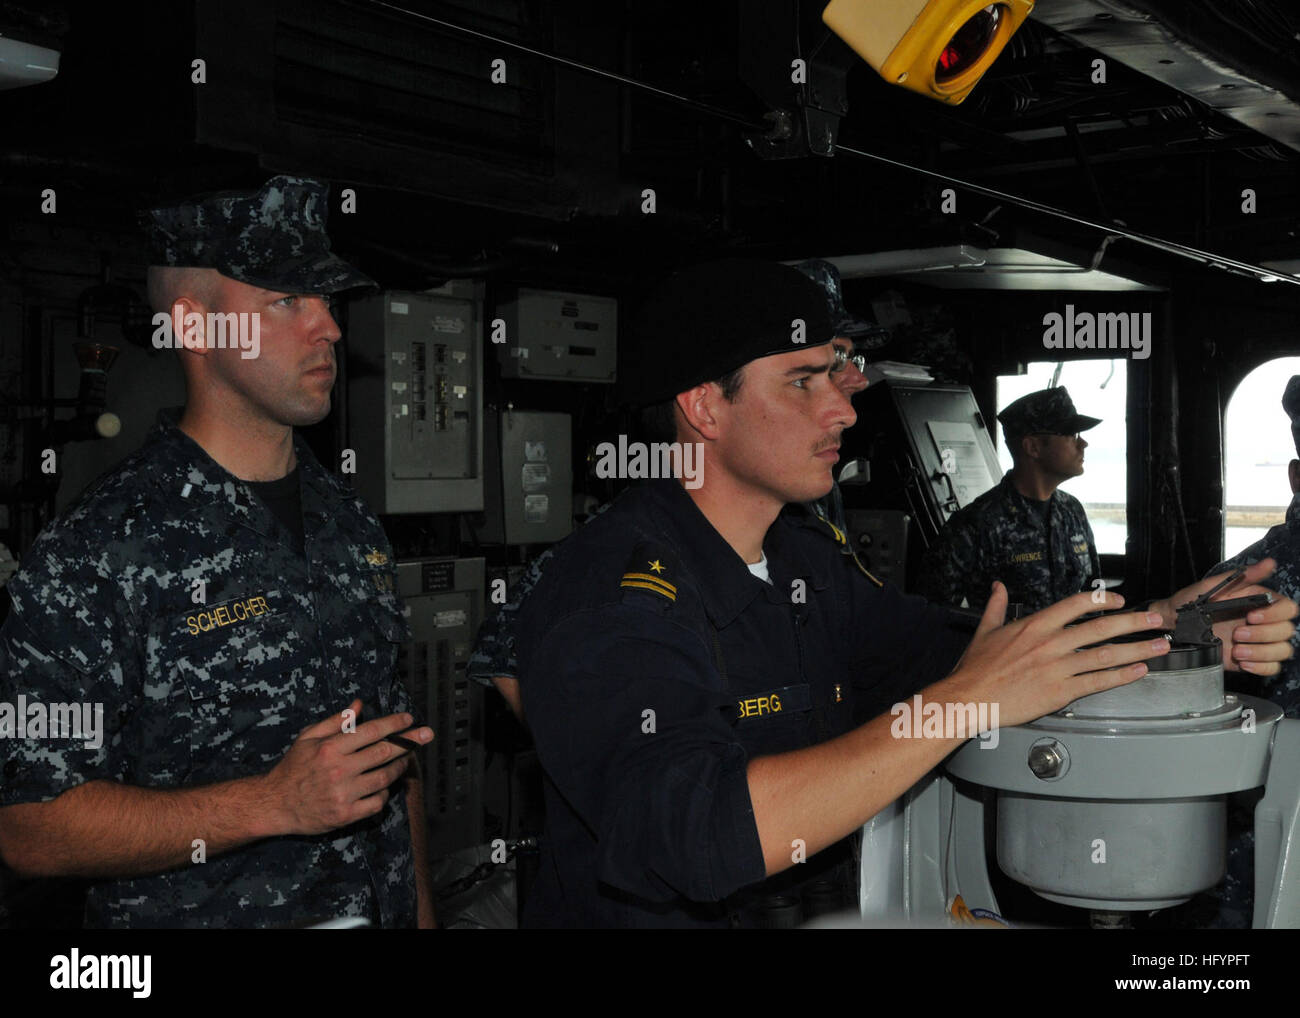 110421-N-NL541-128 SALVADOR, Brazil (April 21, 2011) Lt. j.g. Michael Schelcher, left, and Lt. j.g. Pablo Berg, from the Chilean navy, observe from the pilot house as the guided-missile frigate USS Thach (FFG 43) departs the pier at Salvador, Brazil. Thach is deployed in support of Southern Seas 2011. (U.S. Navy photo by Mass Communication Specialist 3rd Class Stuart Phillips/Released) US Navy 110421-N-NL541-128 Lt. j.g. Michael Schelcher, left, and Lt. j.g. Pablo Berg, from the Chilean navy, observe from the pilot house as the gu Stock Photo